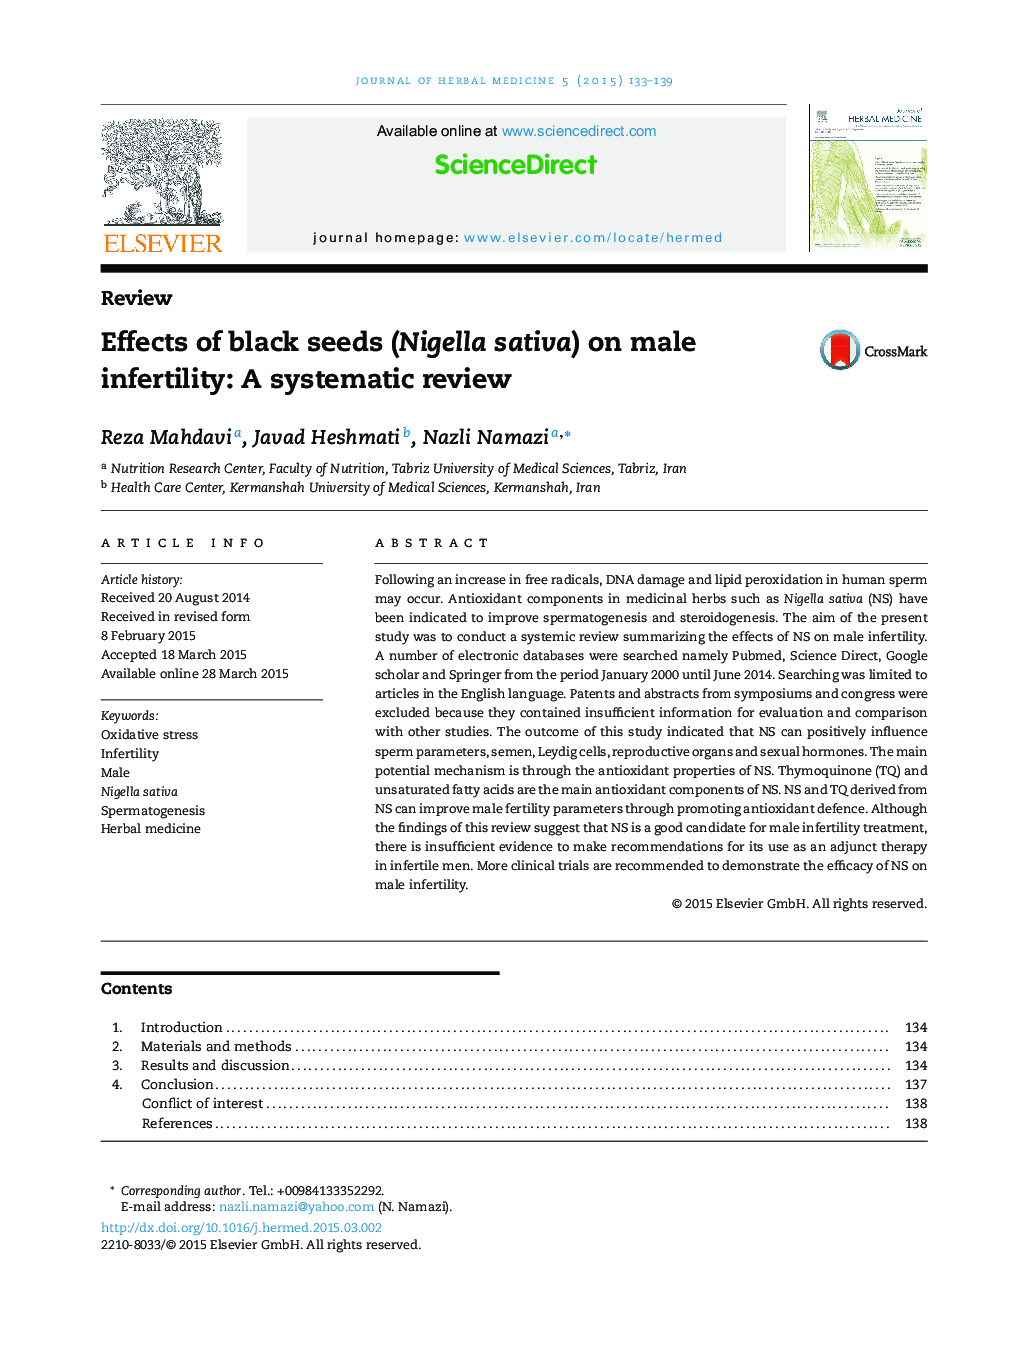 Effects of black seeds (Nigella sativa) on male infertility: A systematic review